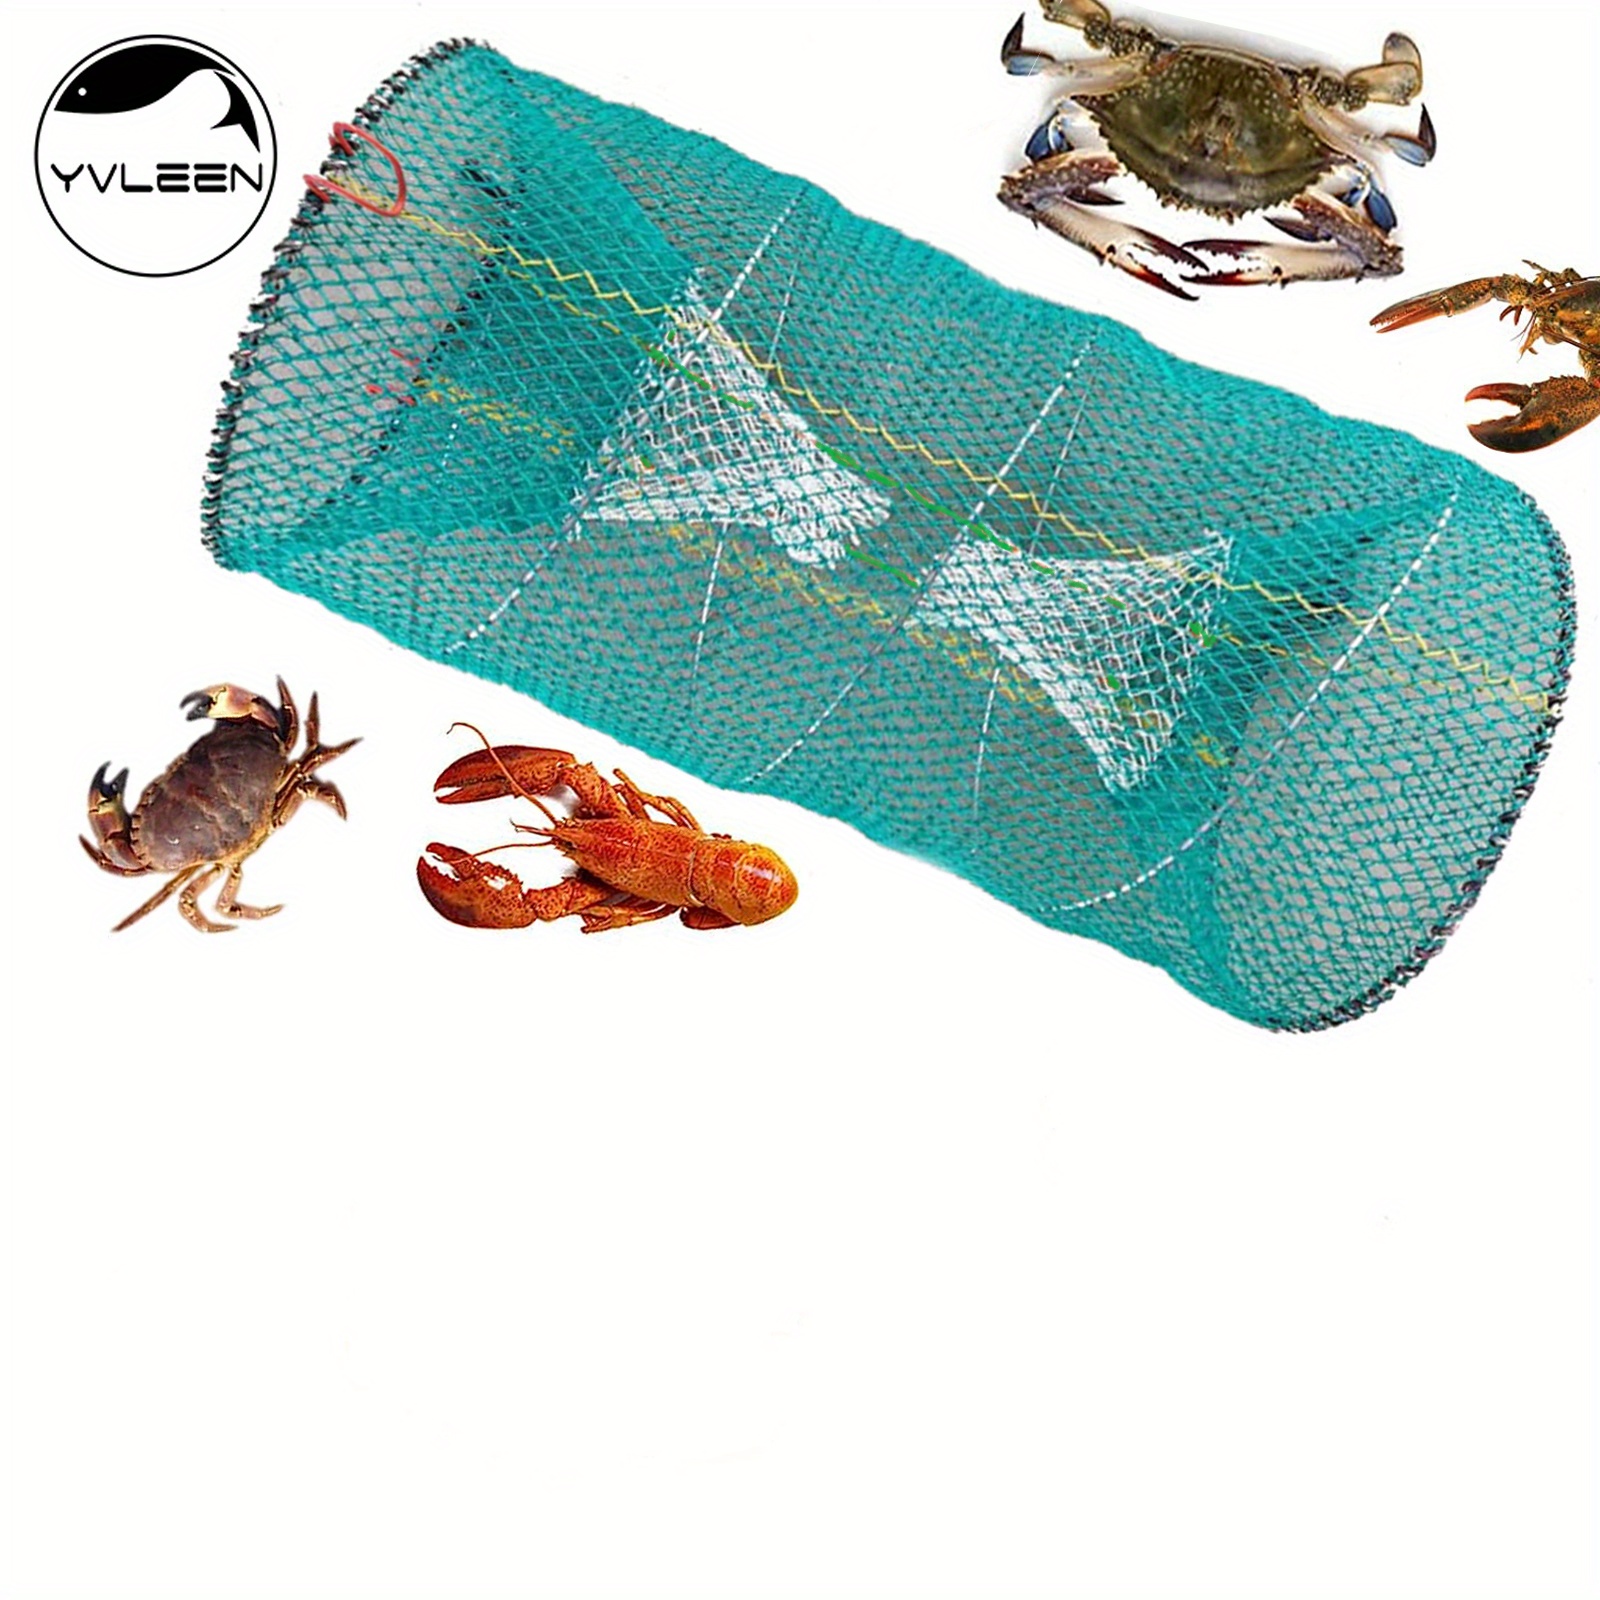 Catch More Fish with this Reusable Crab Trap - Perfect for Freshwater,  Saltwater, and Outdoor Fishing!